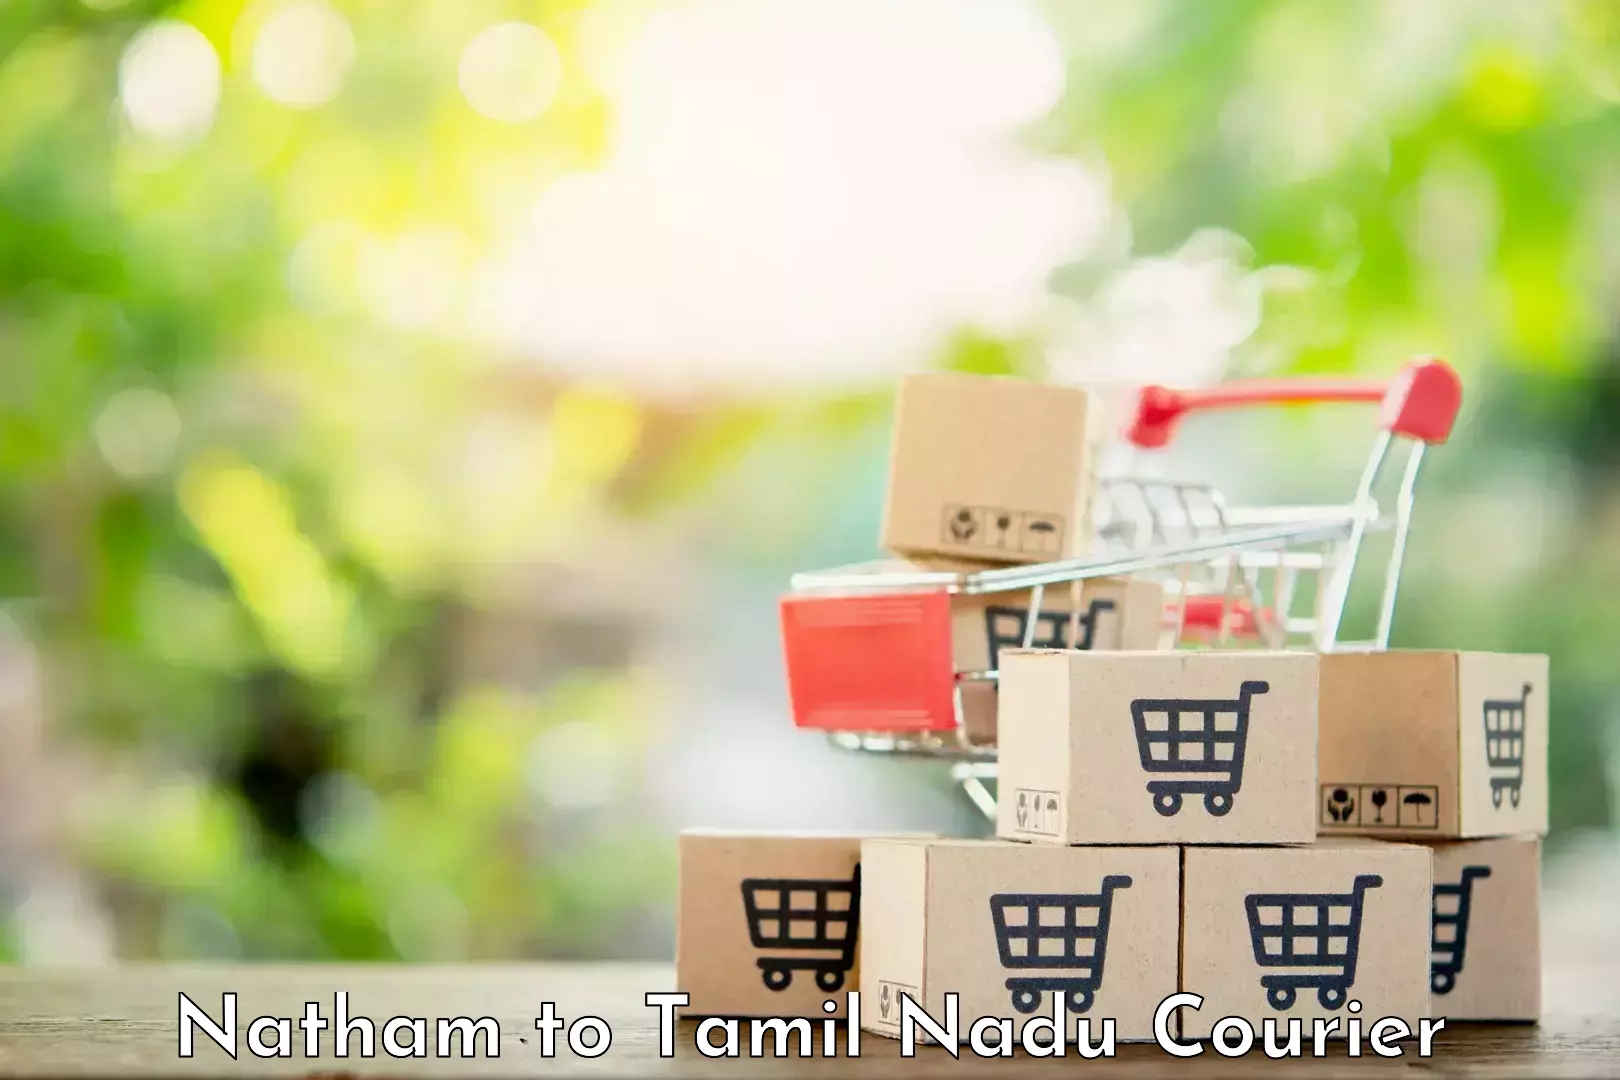 Courier service comparison Natham to Ennore Port Chennai